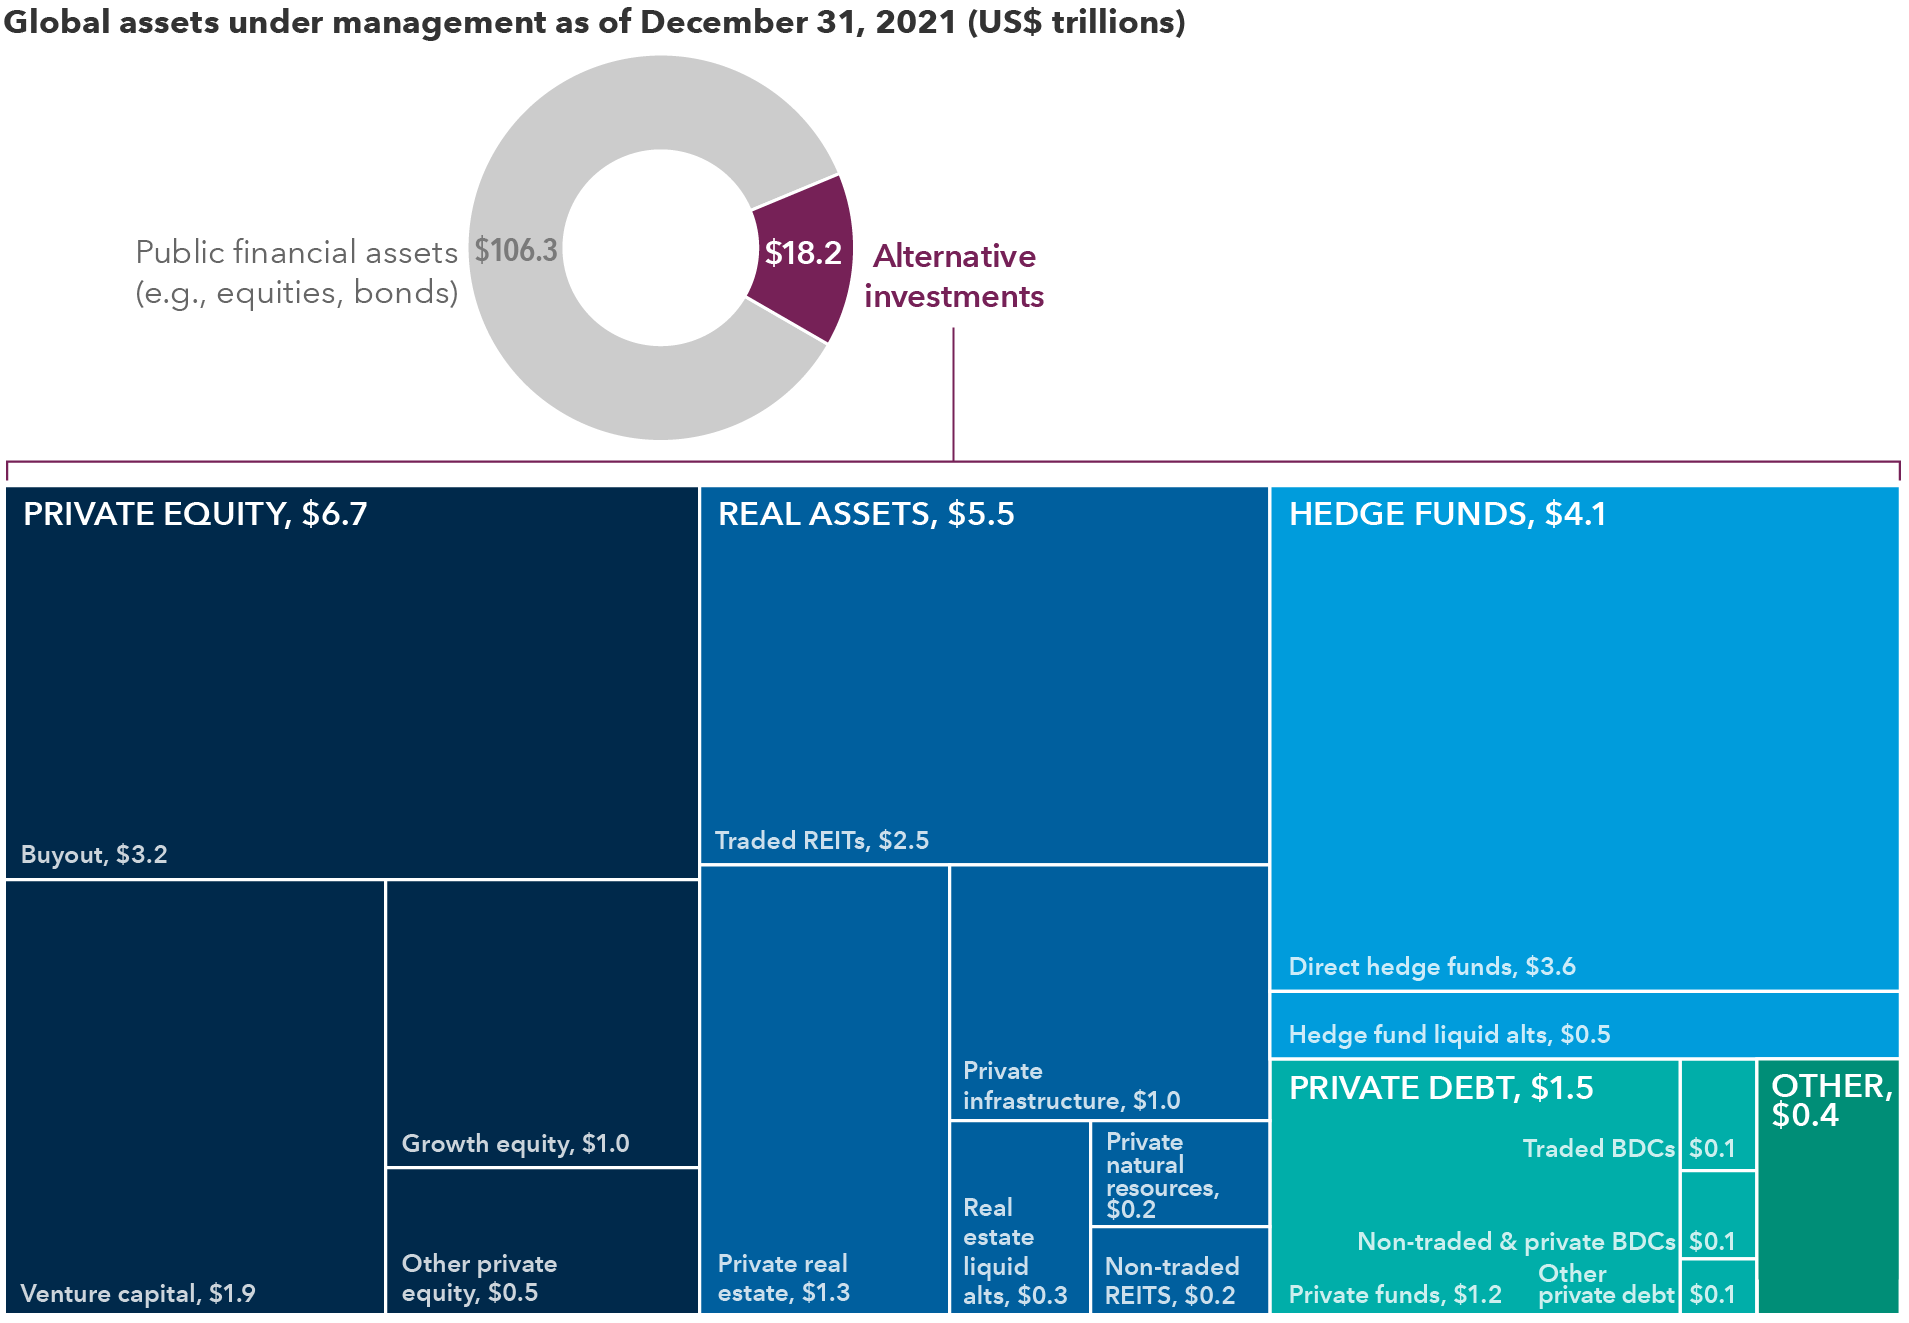 A pie chart showing global assets under management broken into Public financial assets, which represent $106.3 trillion, and Alternative investments, which represent $18.2 trillion. Below that, a tree map chart breaks down the Alternative investments portion, which includes: $6.7 trillion in Private equity; $5.5 trillion in Real assets; $4.1 trillion in Hedge funds; $1.5 trillion in Private debt; and $0.4 trillion in other alternative investments. Private equity includes: $3.2 trillion in buyout; $1.9 trillion in venture capital; $1.0 trillion in growth equity; and $0.5 trillion in other private equity. Real assets includes: $2.5 trillion in traded REITs; $1.3 trillion in private real estate; $1.0 trillion in private infrastructure; $0.3 trillion in real estate liquid alts; $0.2 trillion in private natural resources; and $0.2 trillion in non-traded REITs. Hedge funds includes: $3.6 trillion in direct hedge funds and $0.5 trillion in hedge fund liquid alts. Private debt includes: $1.2 trillion in private funds; $0.1 trillion in traded BDCs; $0.1 trillion in non-traded and private BDCs; and $0.1 trillion in other private debt.